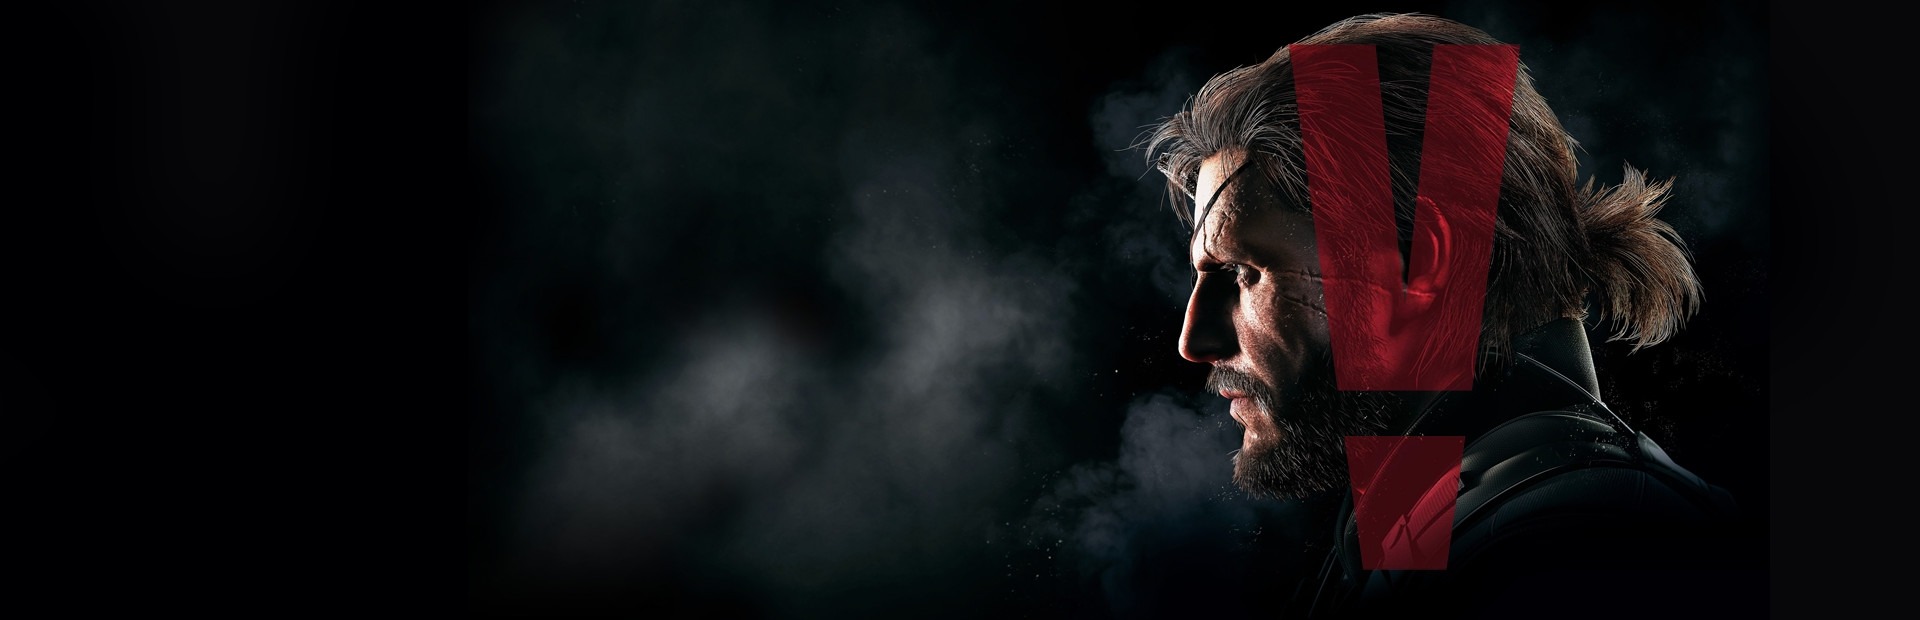 Banner Metal Gear Solid V: The Definitive Experience